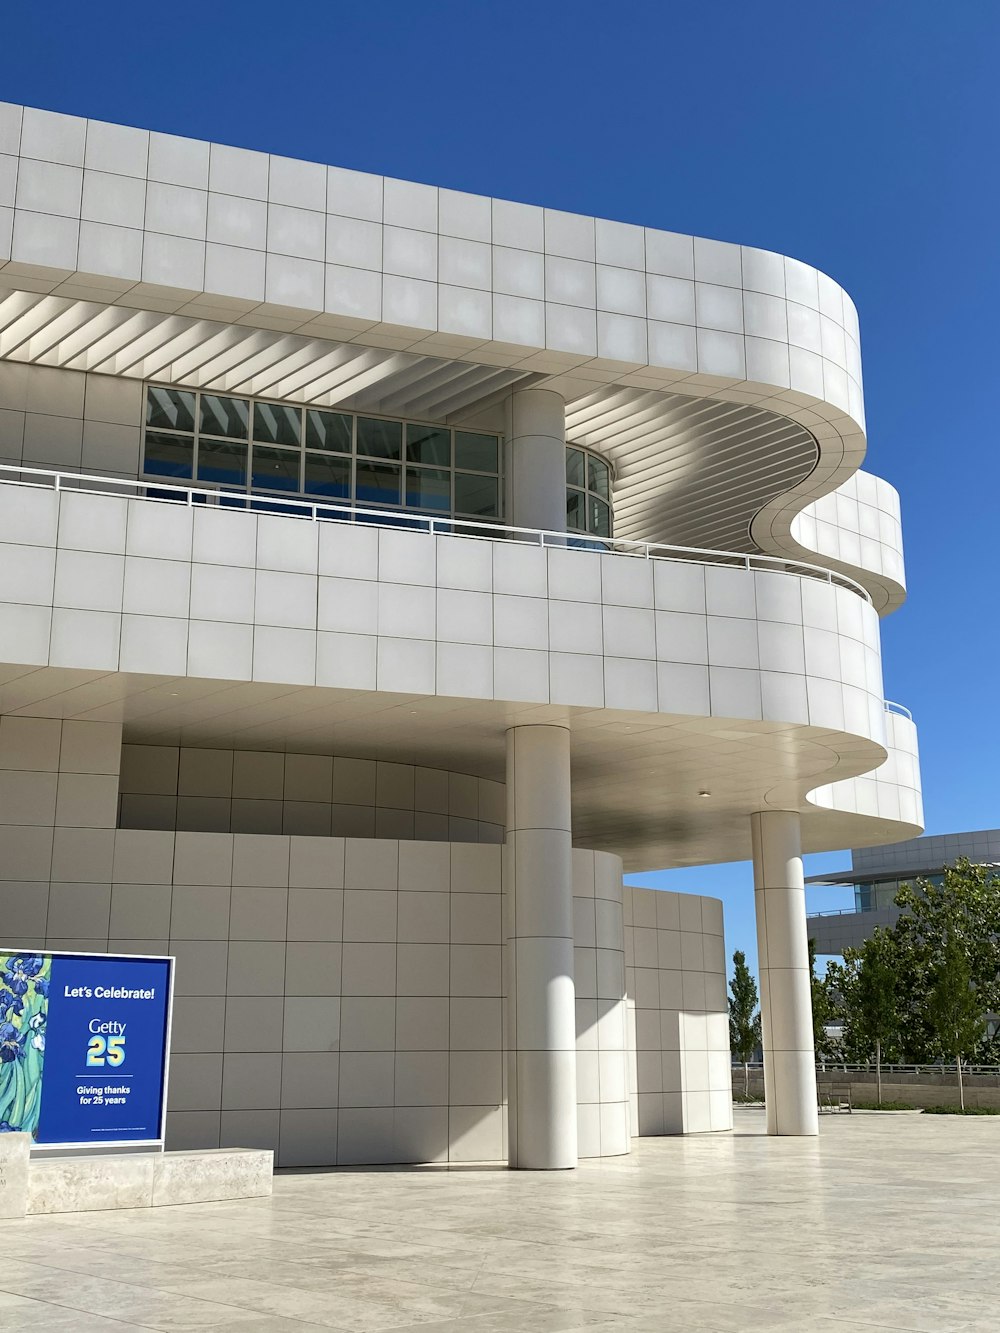 Getty Center with a white exterior